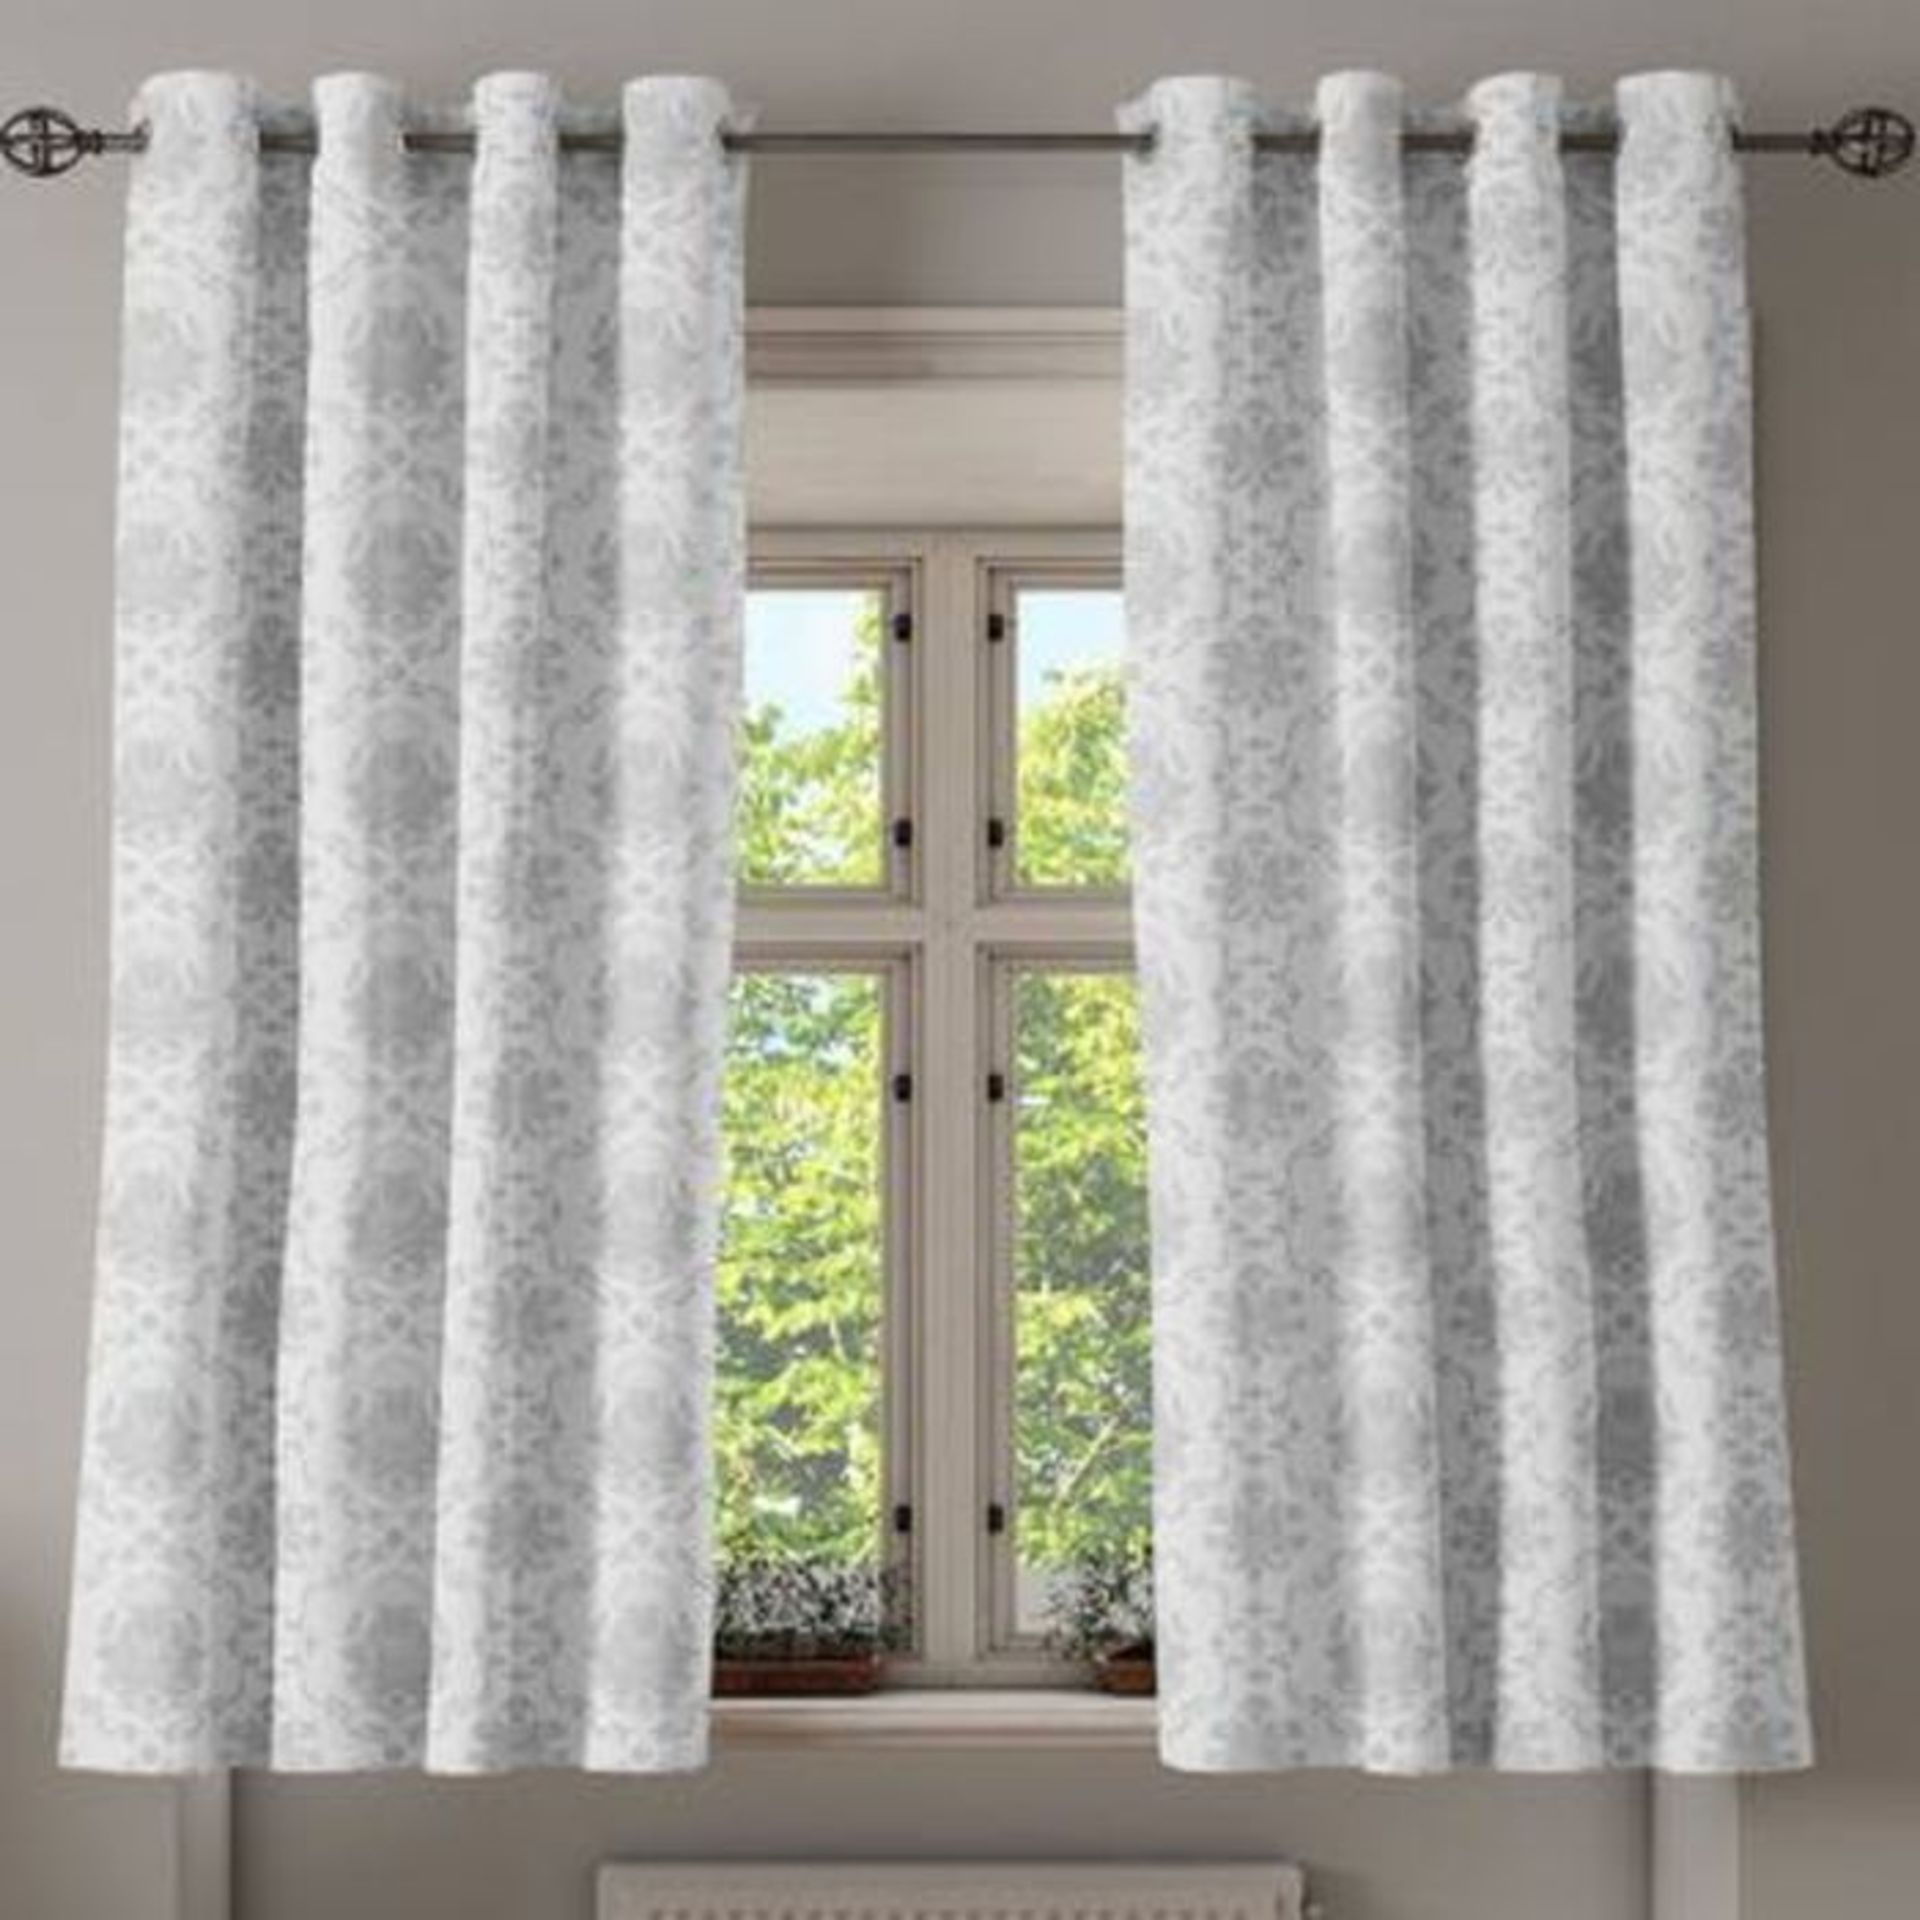 Astoria Grand, Napolitano Victorian Tulips Eyelet Semi Sheer Thermal Curtains (WHITE/GREY) (SIZE - Image 4 of 4